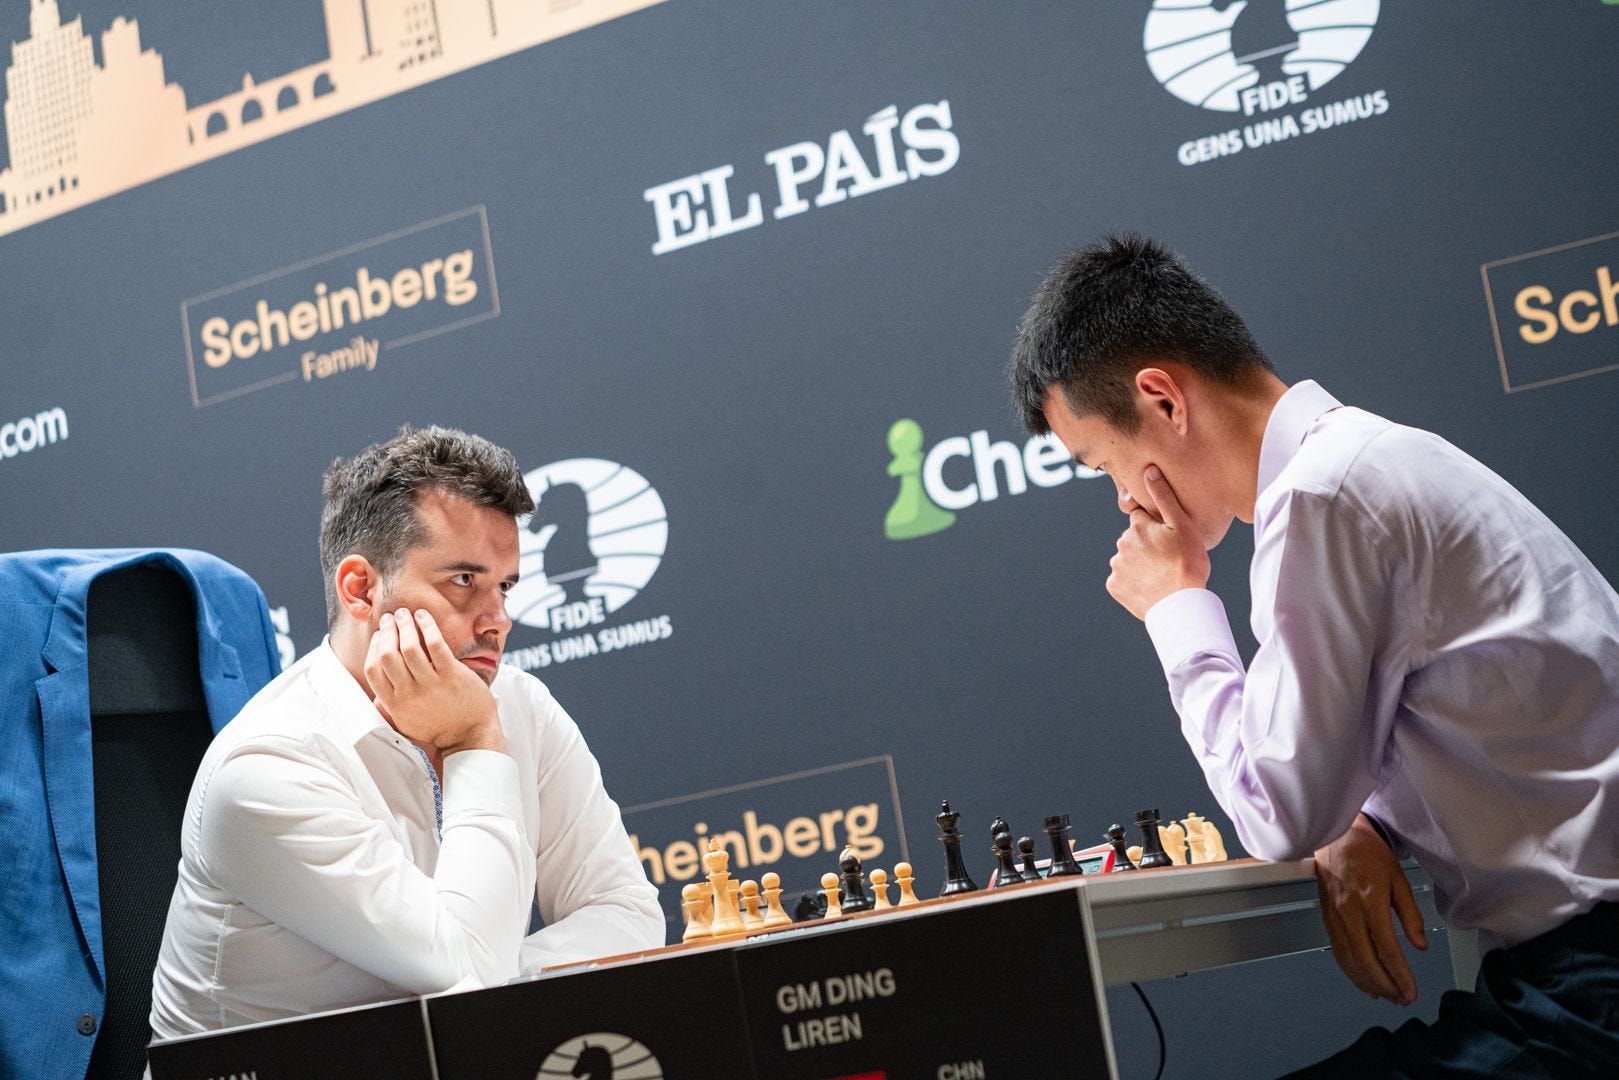 Ding Liren: Unbelievable, since I lost to Magnus so many times